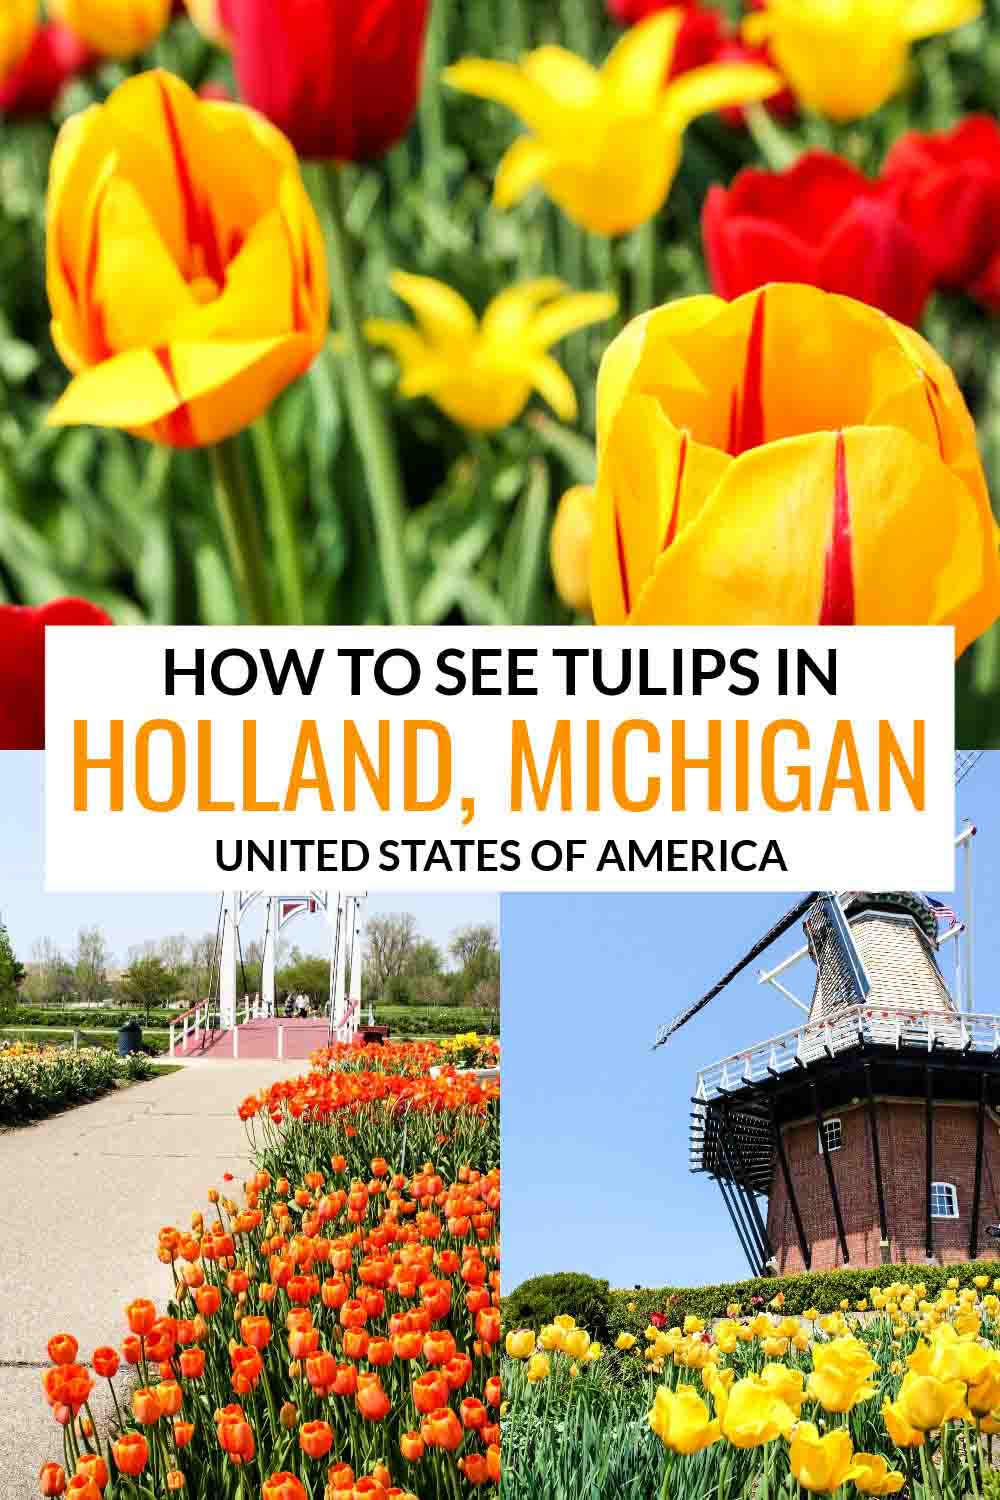 How to See Tulips in Holland, Michigan